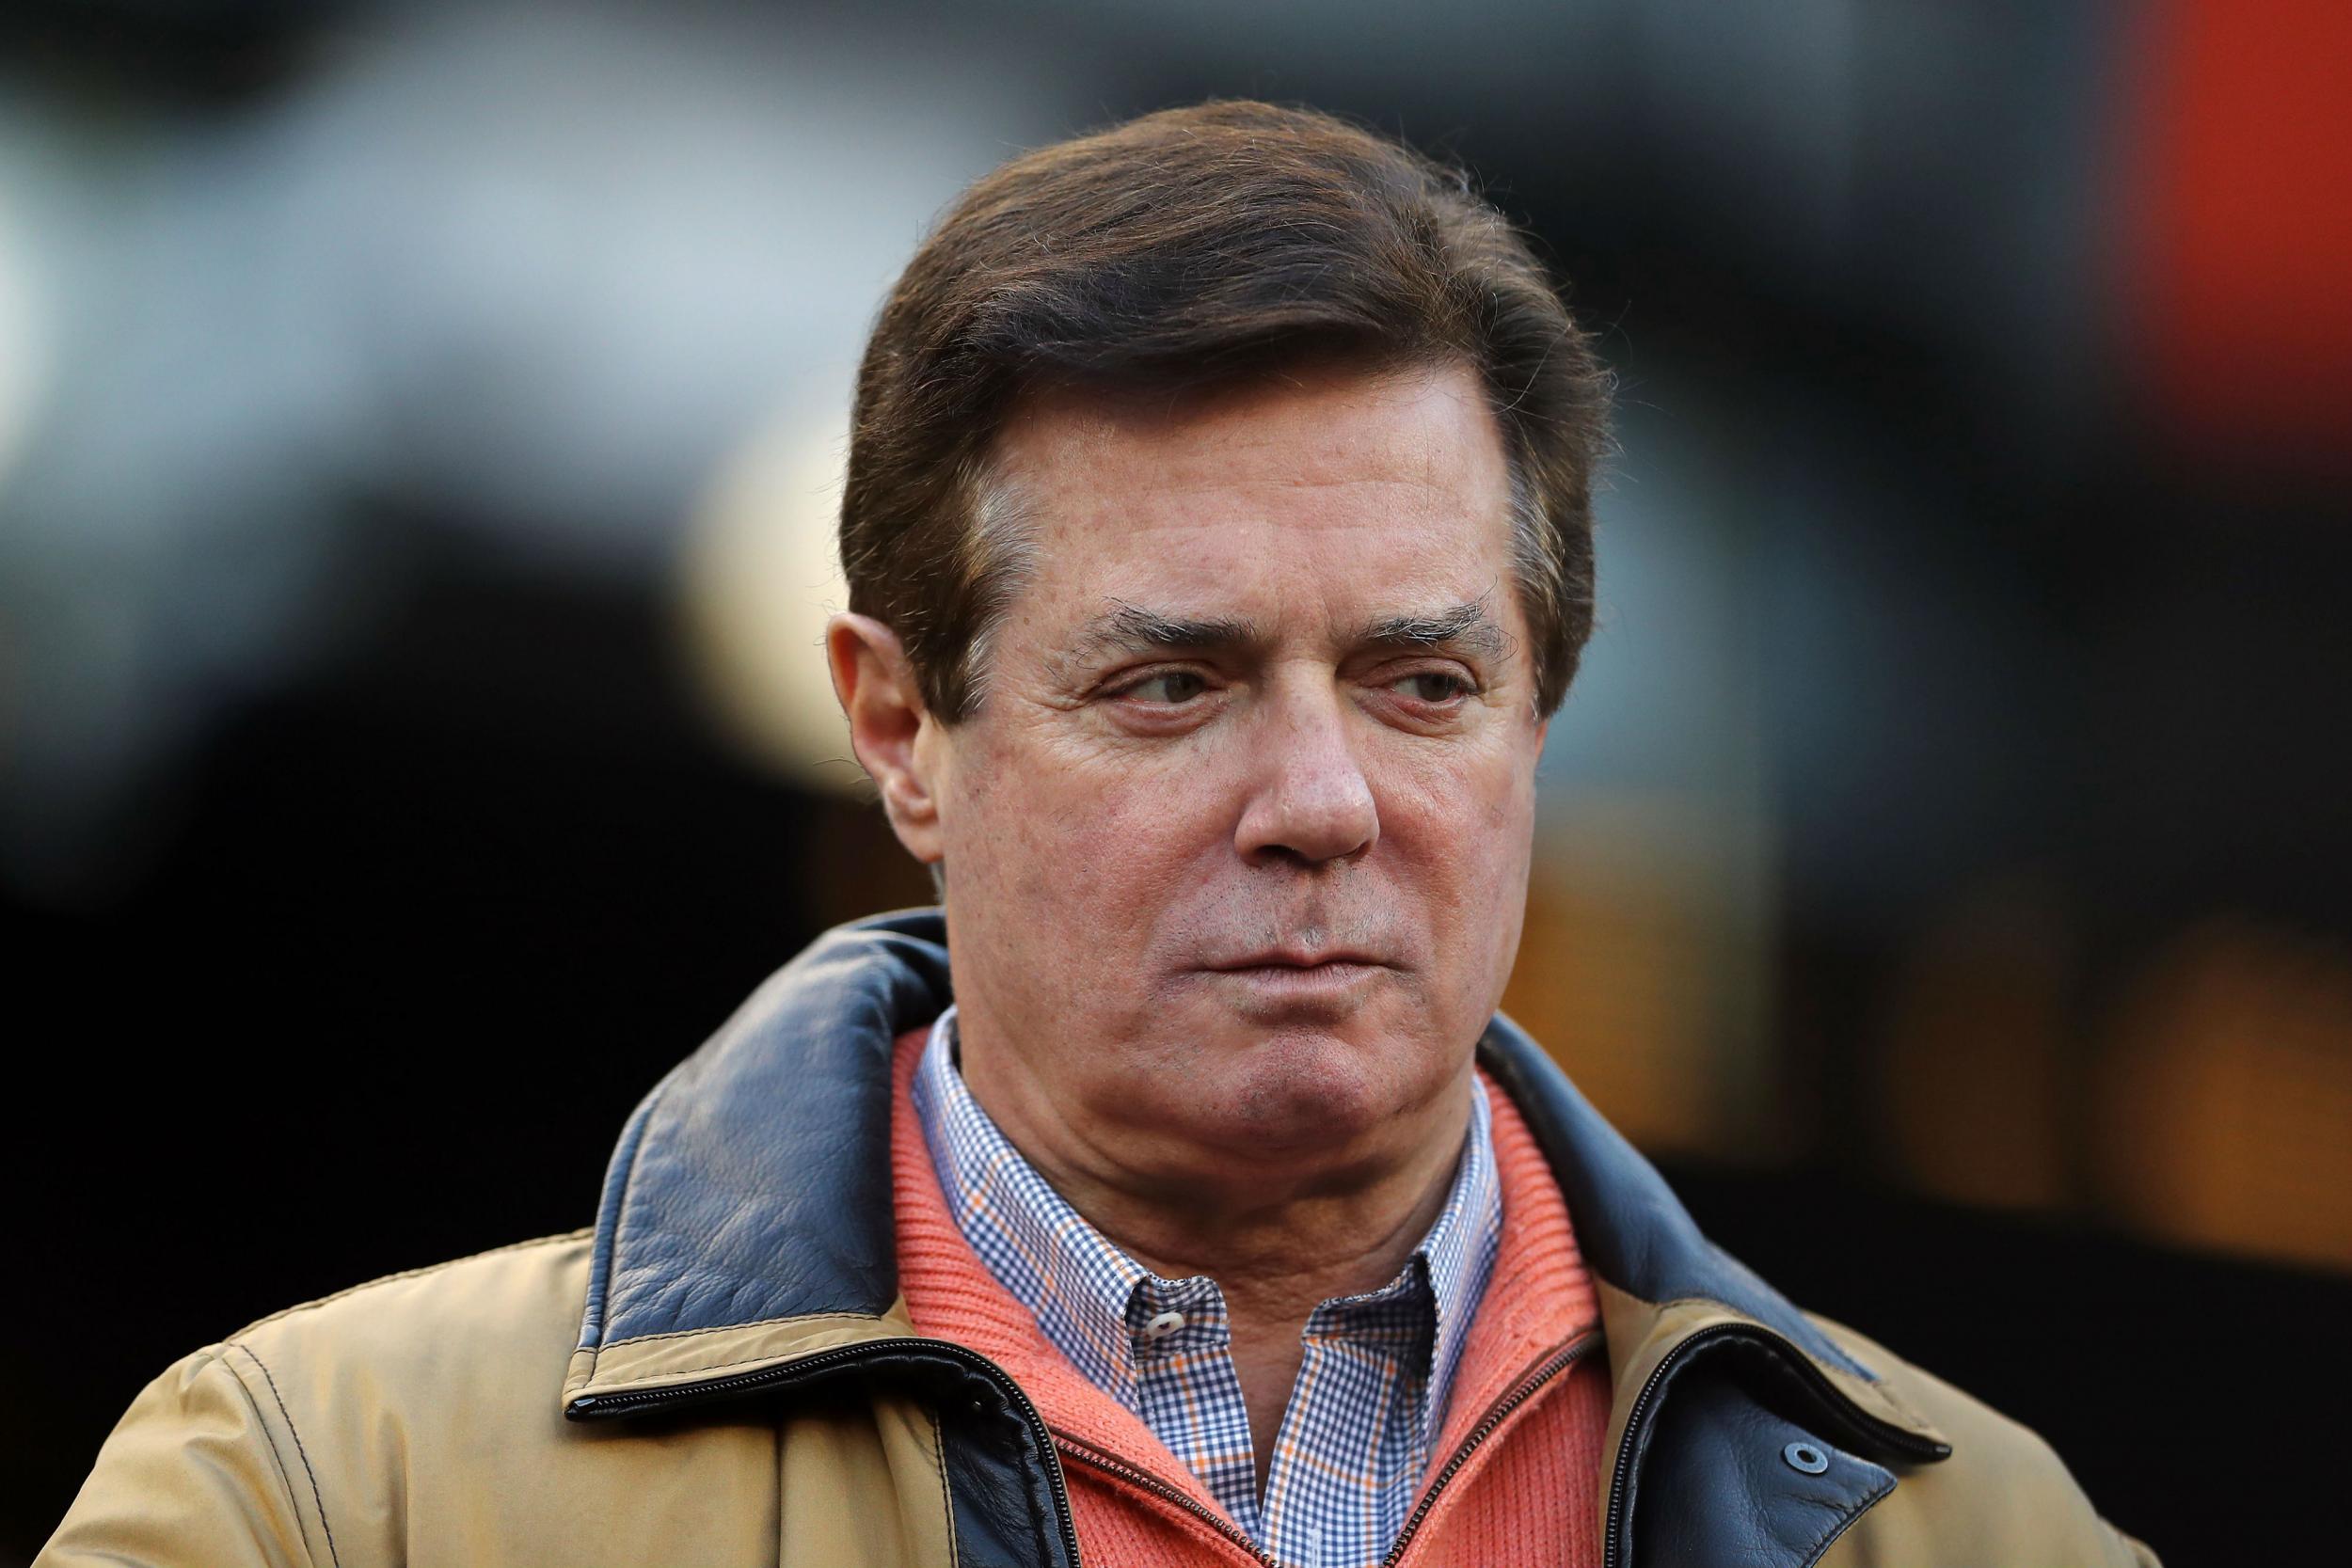 Mr Manafort's home was raided by the FBI earlier this year